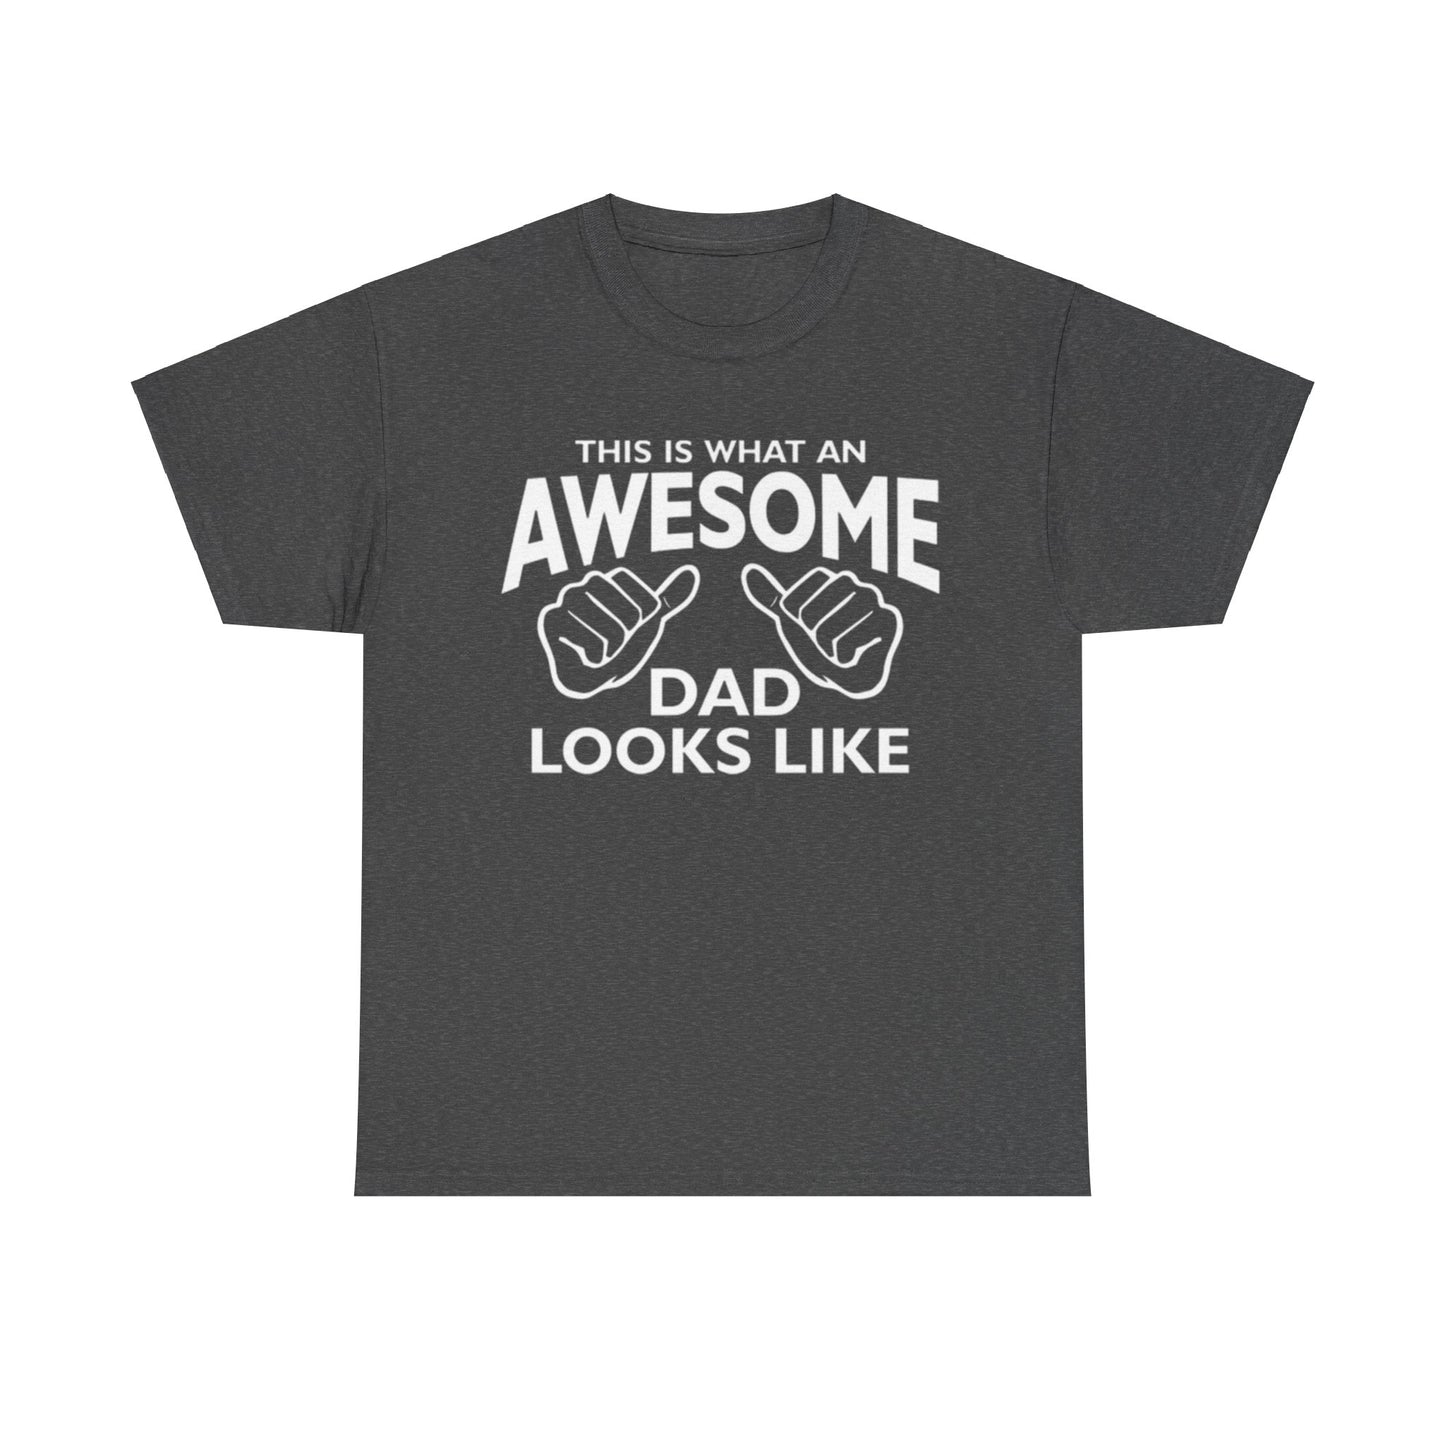 This is What Awesome Dad Looks Like Tshirt, Father's Day Tshirt